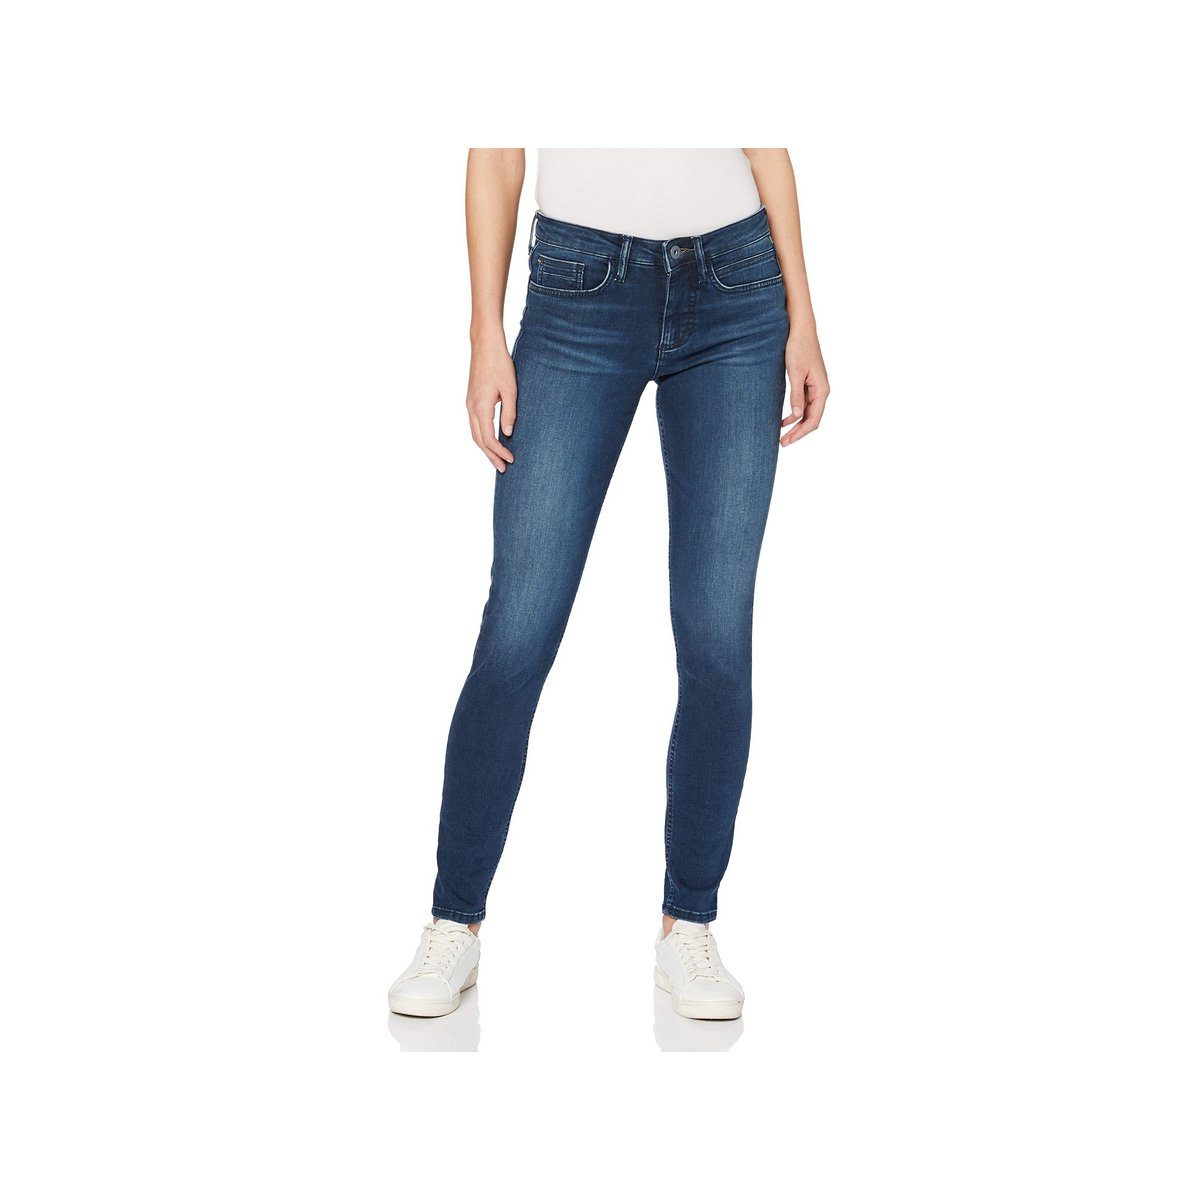 camel active Skinny-fit-Jeans hell-blau skinny (1-tlg) fit